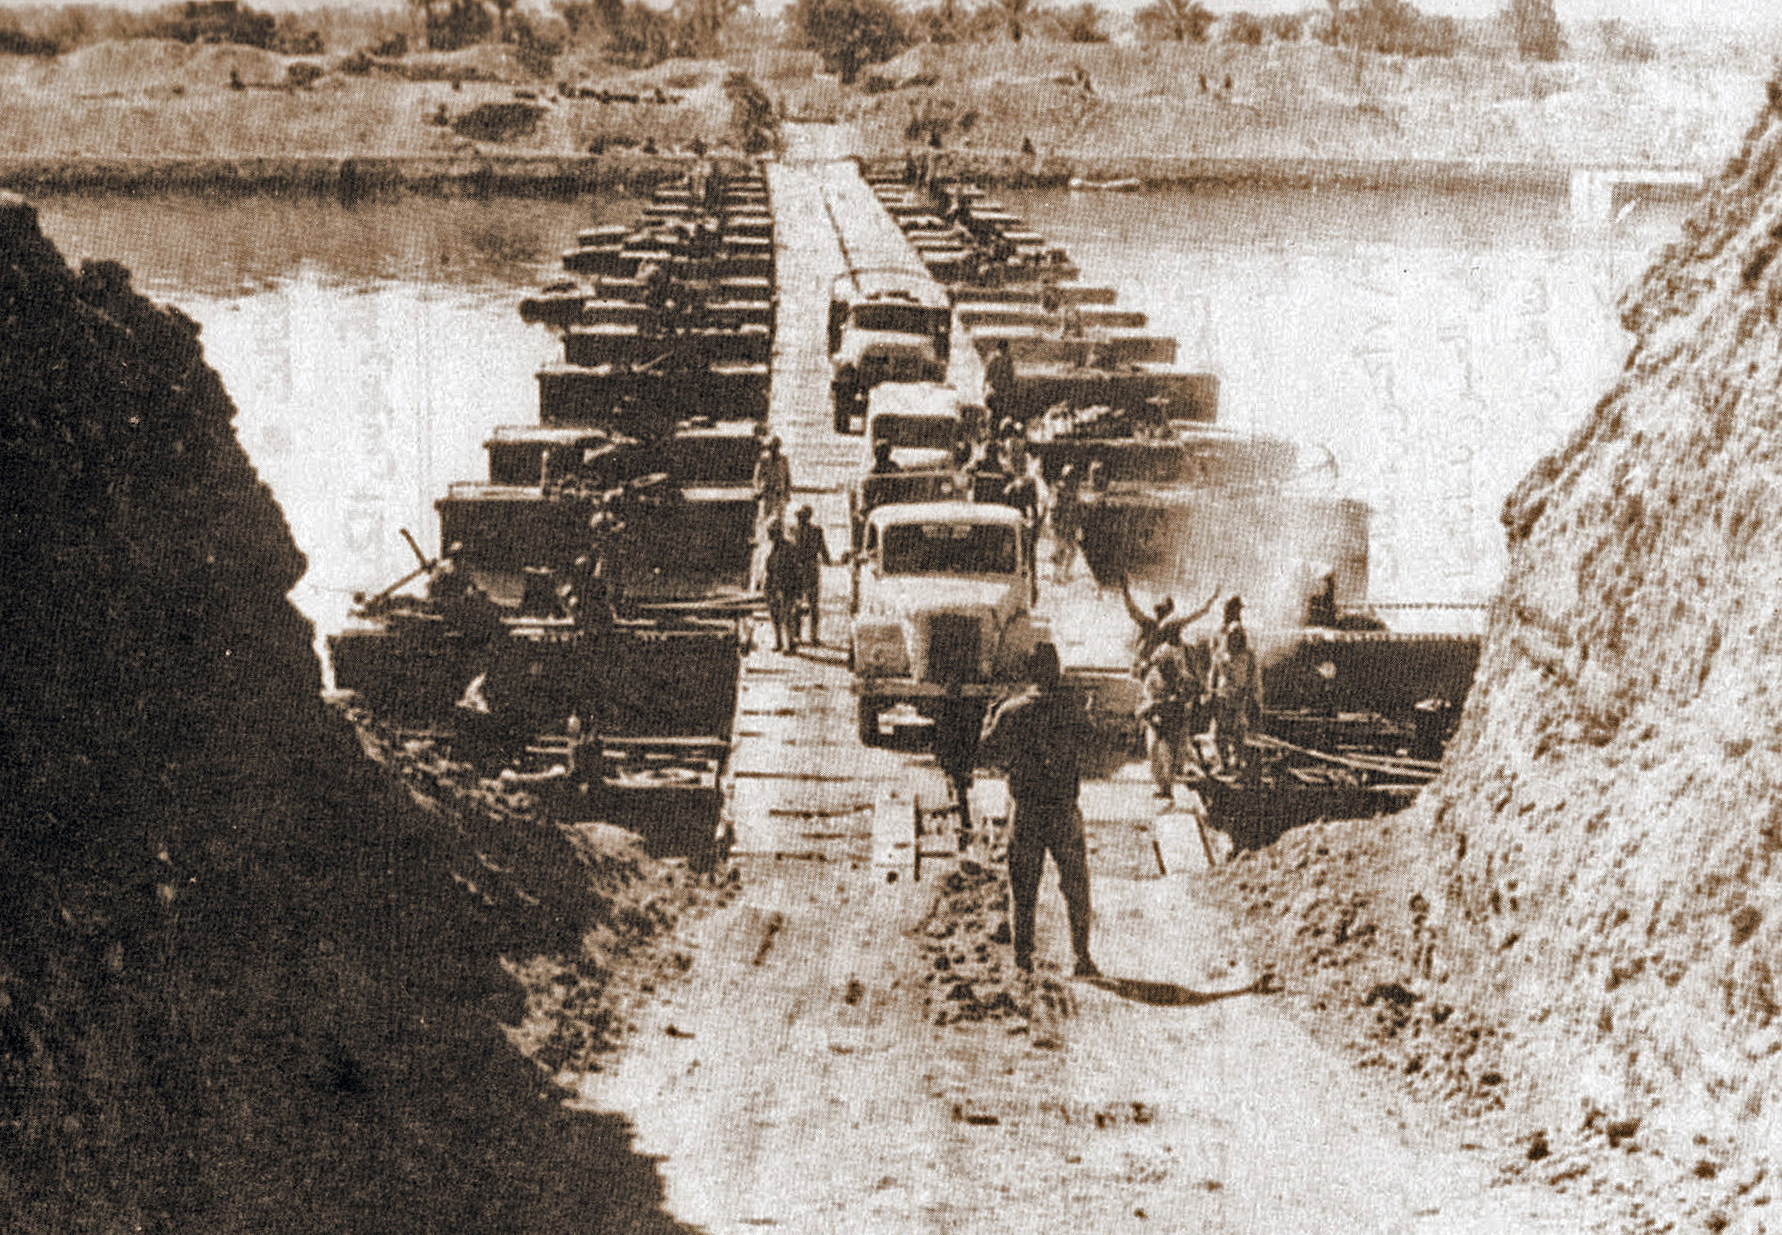 Egyptian forces crossing the Suez Canal during the first week of the war.